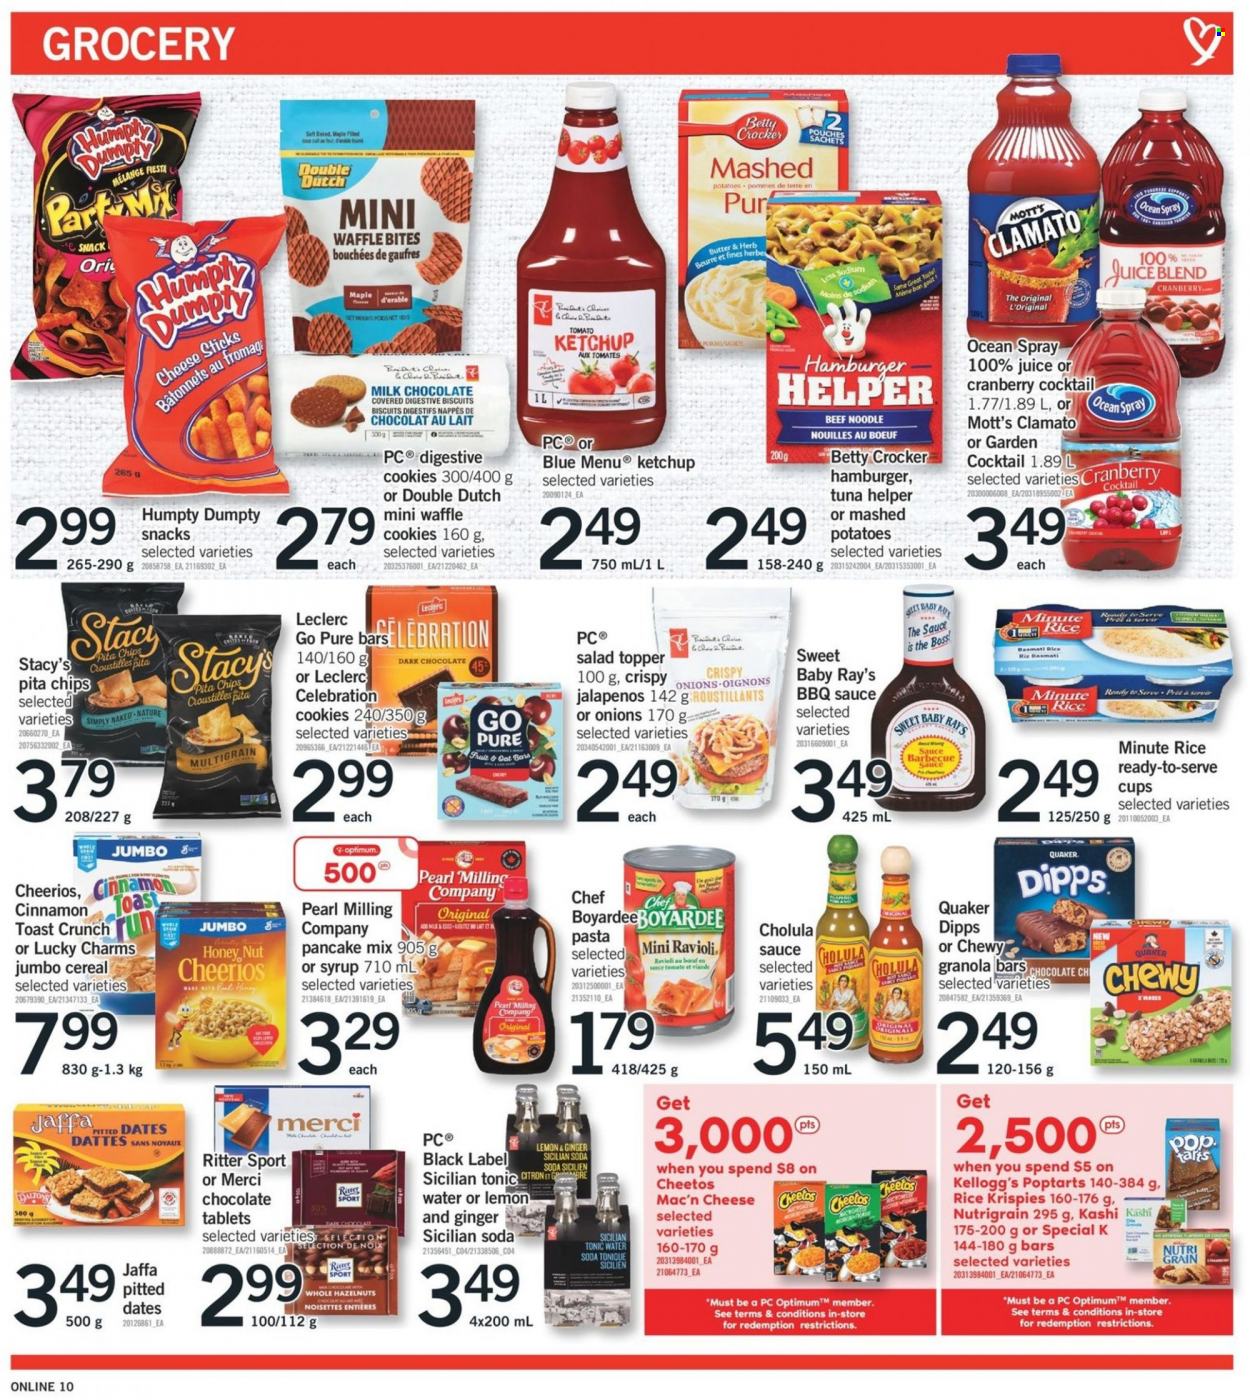 thumbnail - Fortinos Flyer - November 25, 2021 - December 01, 2021 - Sales products - onion, salad, Mott's, tuna, mashed potatoes, ravioli, pasta, pancakes, Quaker, noodles, cheese, butter, cheese sticks, cookies, milk chocolate, snack, Celebration, Kellogg's, biscuit, dark chocolate, Merci, Digestive, Ritter Sport, Cheetos, pita chips, oats, cereals, Cheerios, granola bar, Rice Krispies, Nutri-Grain, basmati rice, cinnamon, BBQ sauce, hazelnuts, dried fruit, dried dates, juice, tonic, Clamato, soda, cup, topper, Optimum, reel, ketchup, chips. Page 11.